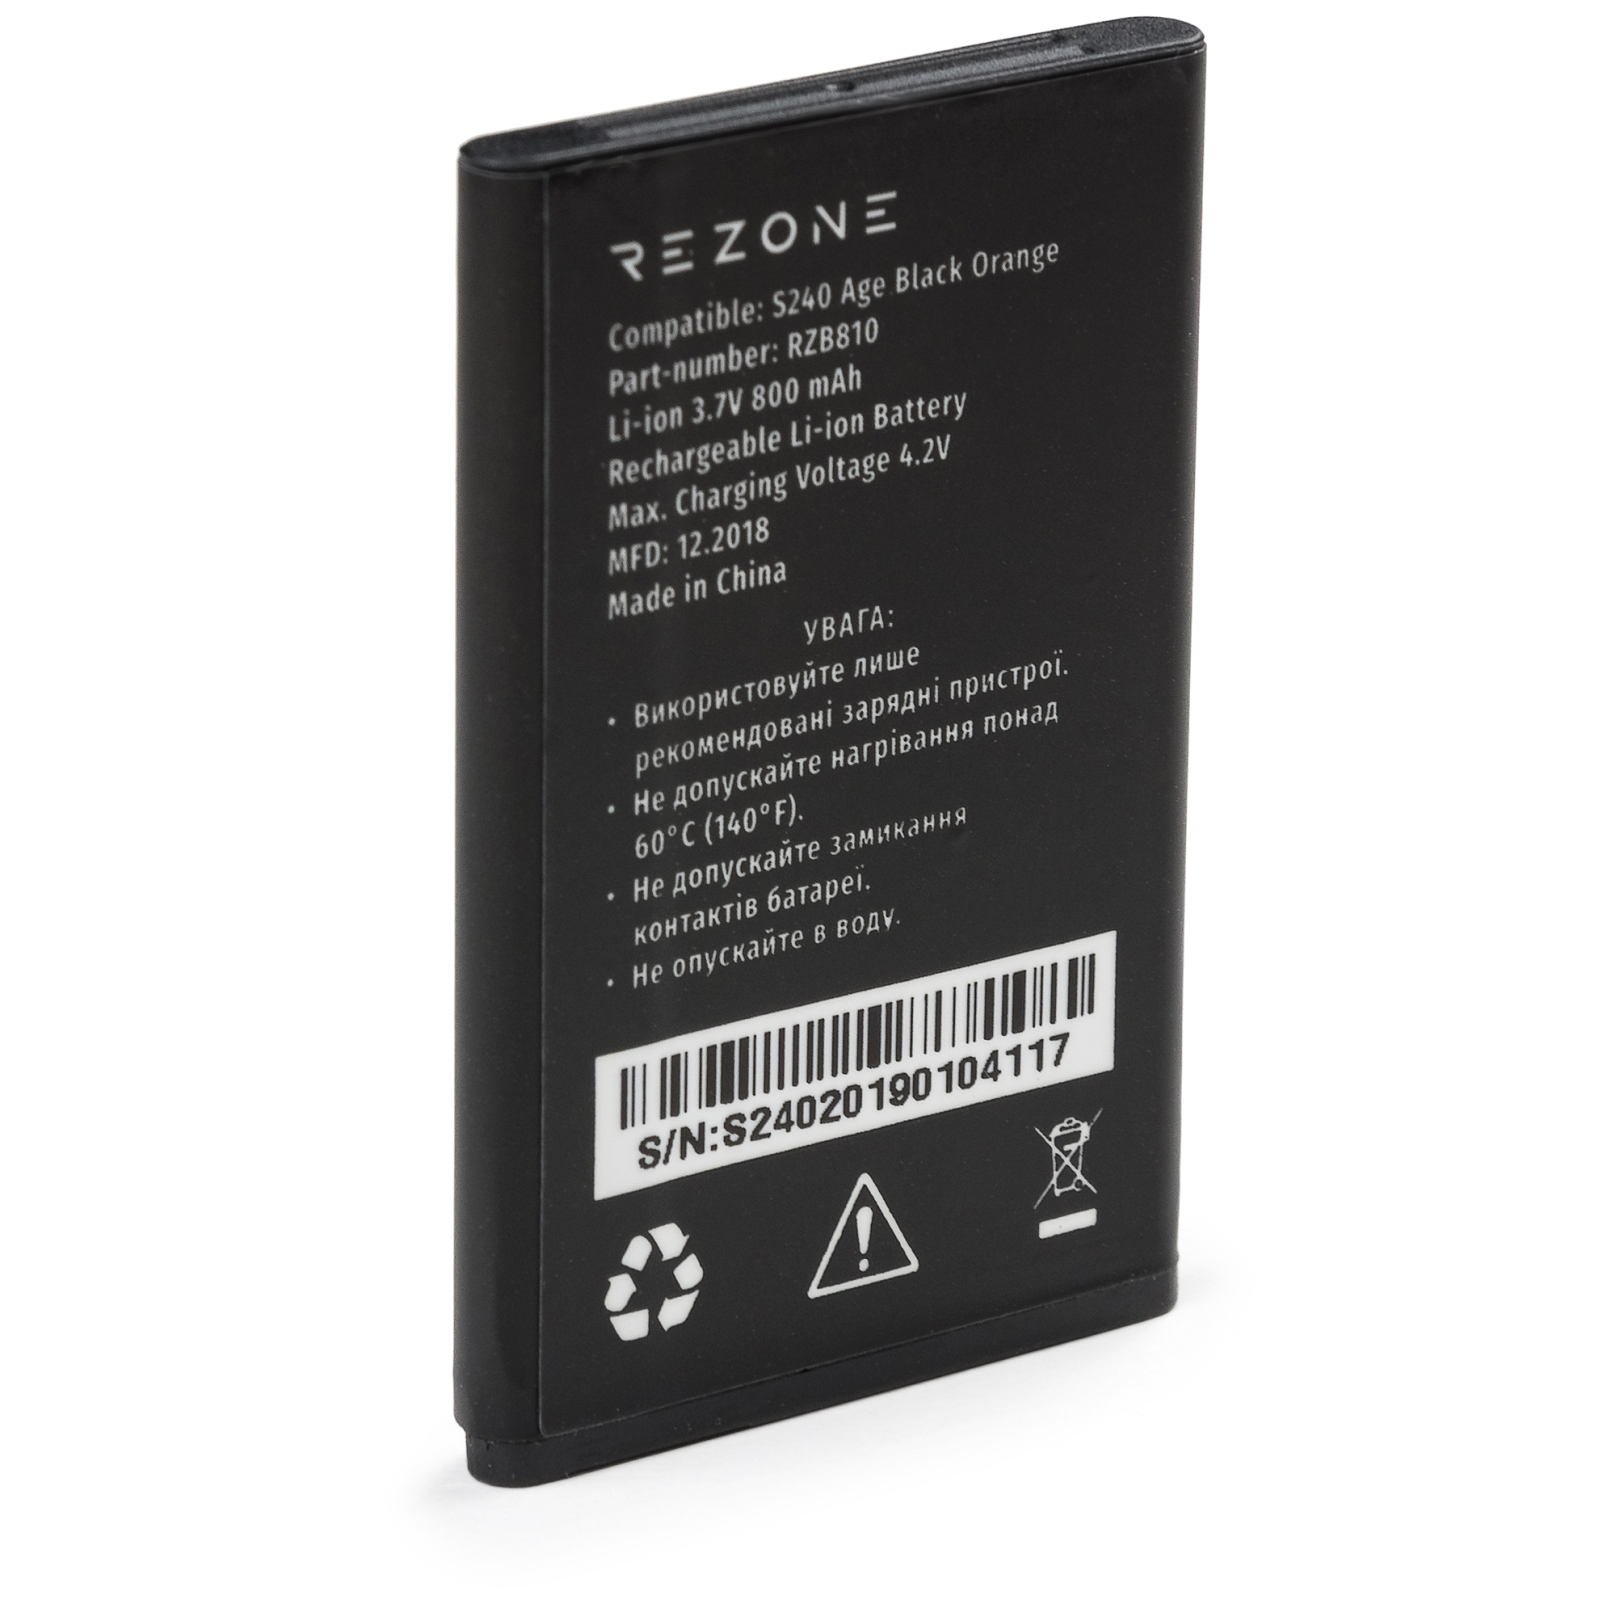 Акумуляторна батарея Rezone for S240 Age / A170 Point 800mah (compatible with BL-4C) (BL-4C) зображення 2